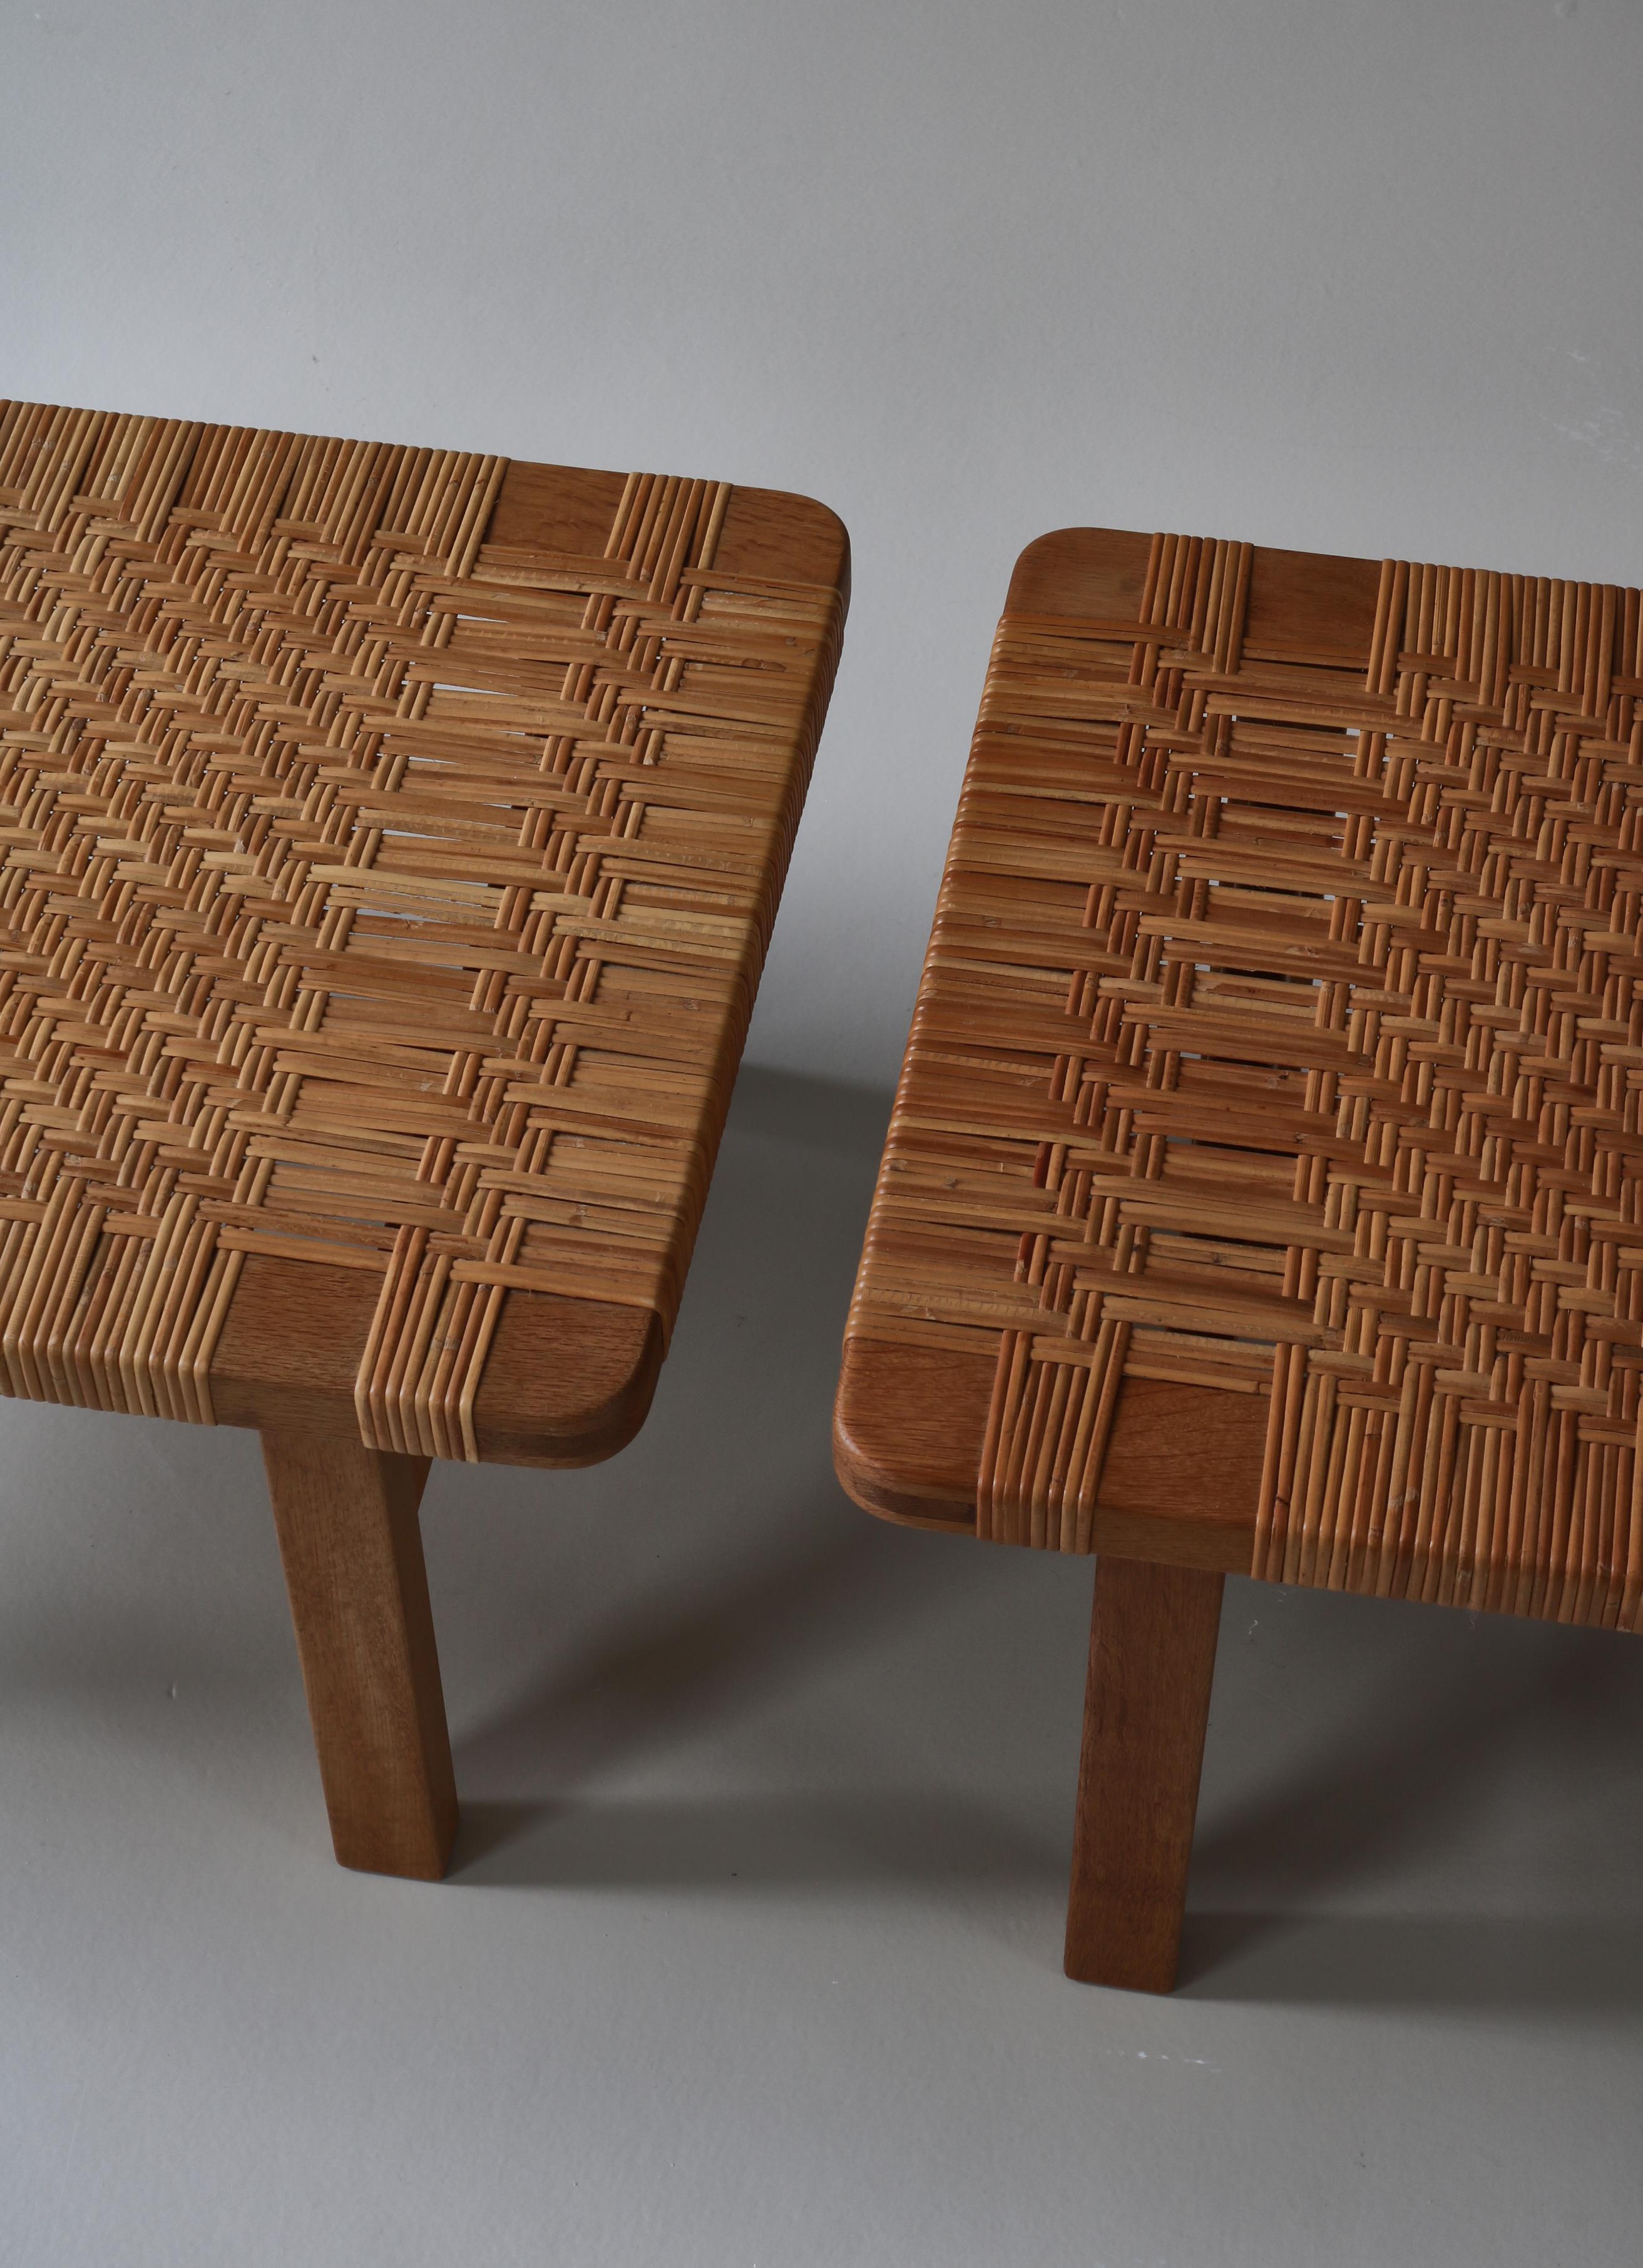 Borge Mogensen Set of Side Tables/Benches in Oak and Rattan Cane, 1960s, Denmark For Sale 3